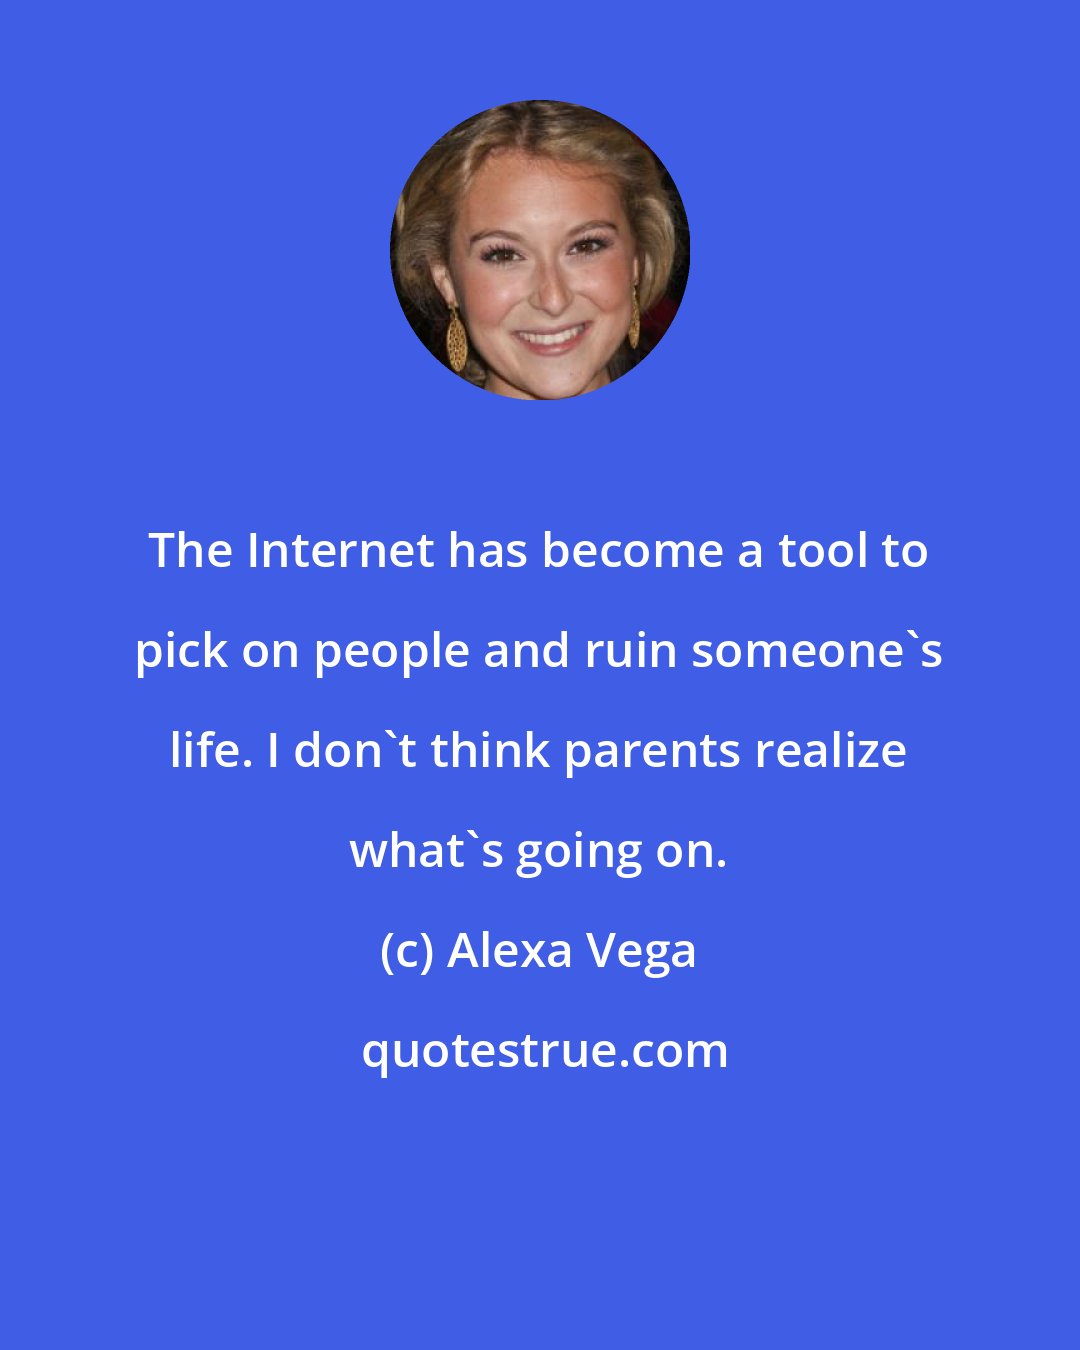 Alexa Vega: The Internet has become a tool to pick on people and ruin someone's life. I don't think parents realize what's going on.